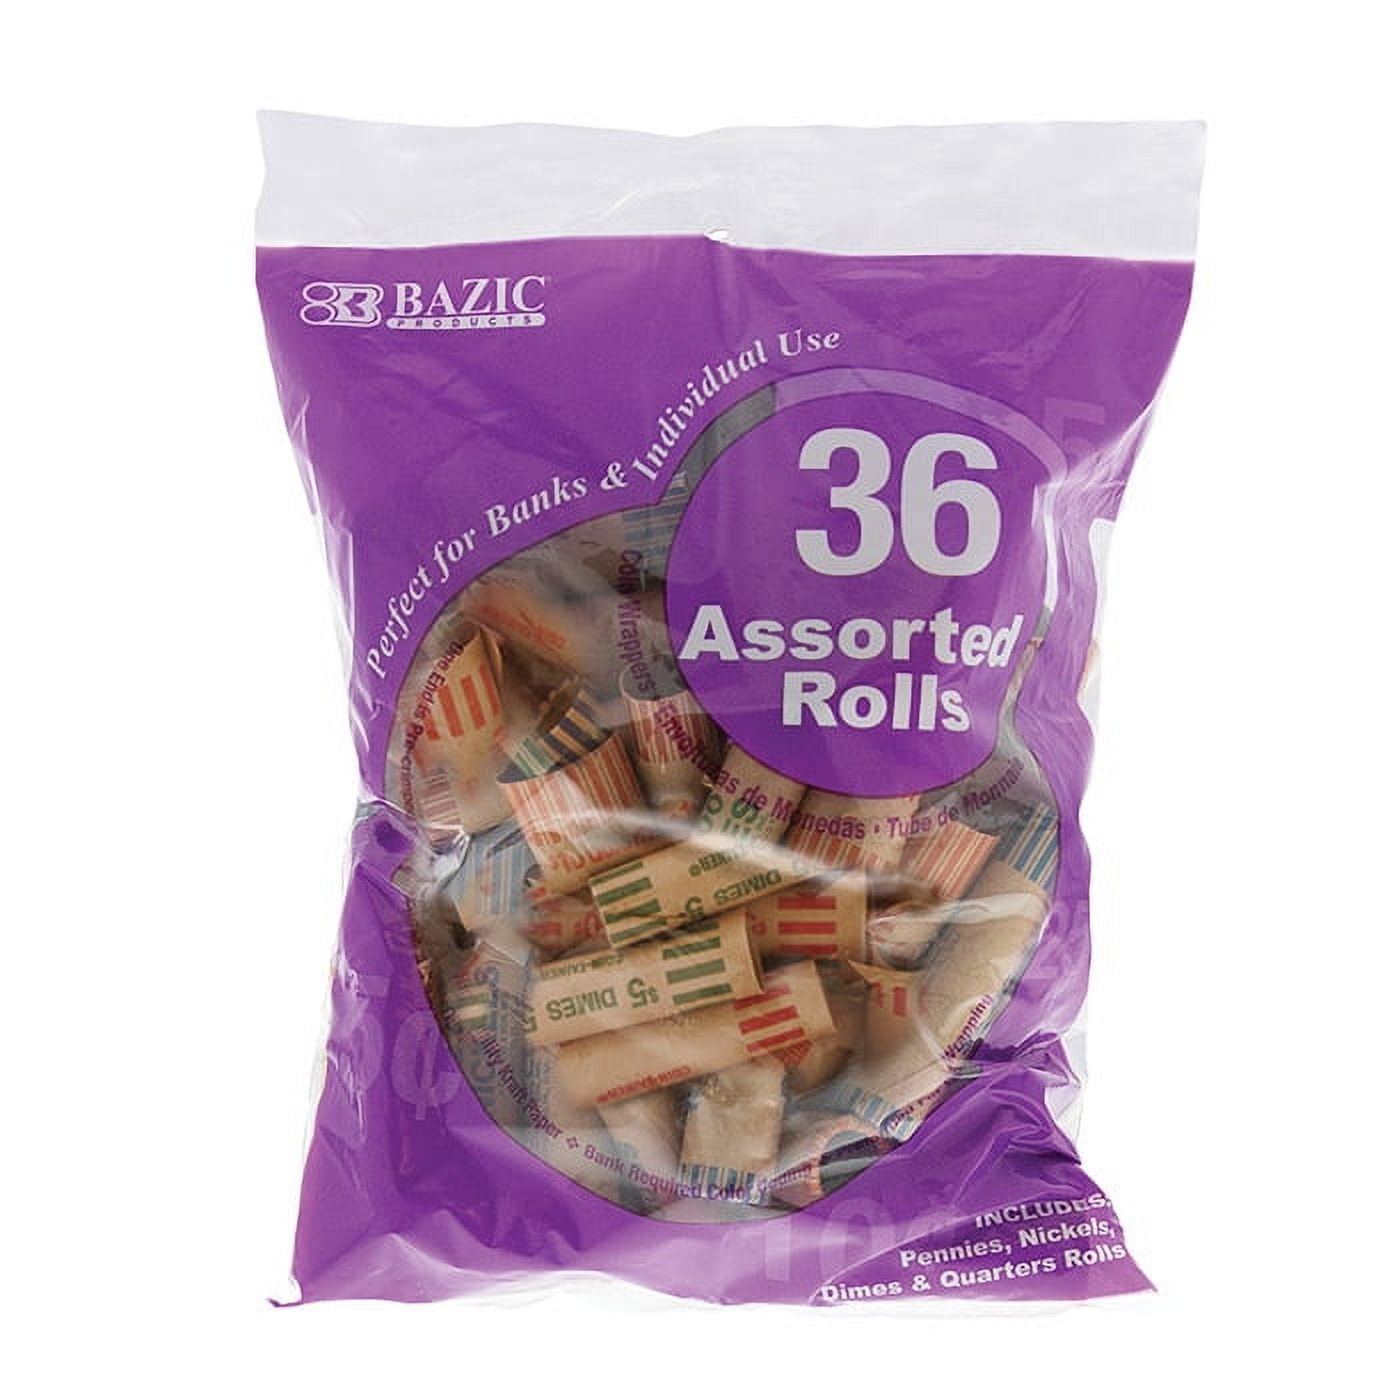  Coin-Tainer Assorted Quarter, Dimes, Nickels, Pennies, Coin  Wrappers, Pack of 36 : Coin Roll Wrappers : Office Products